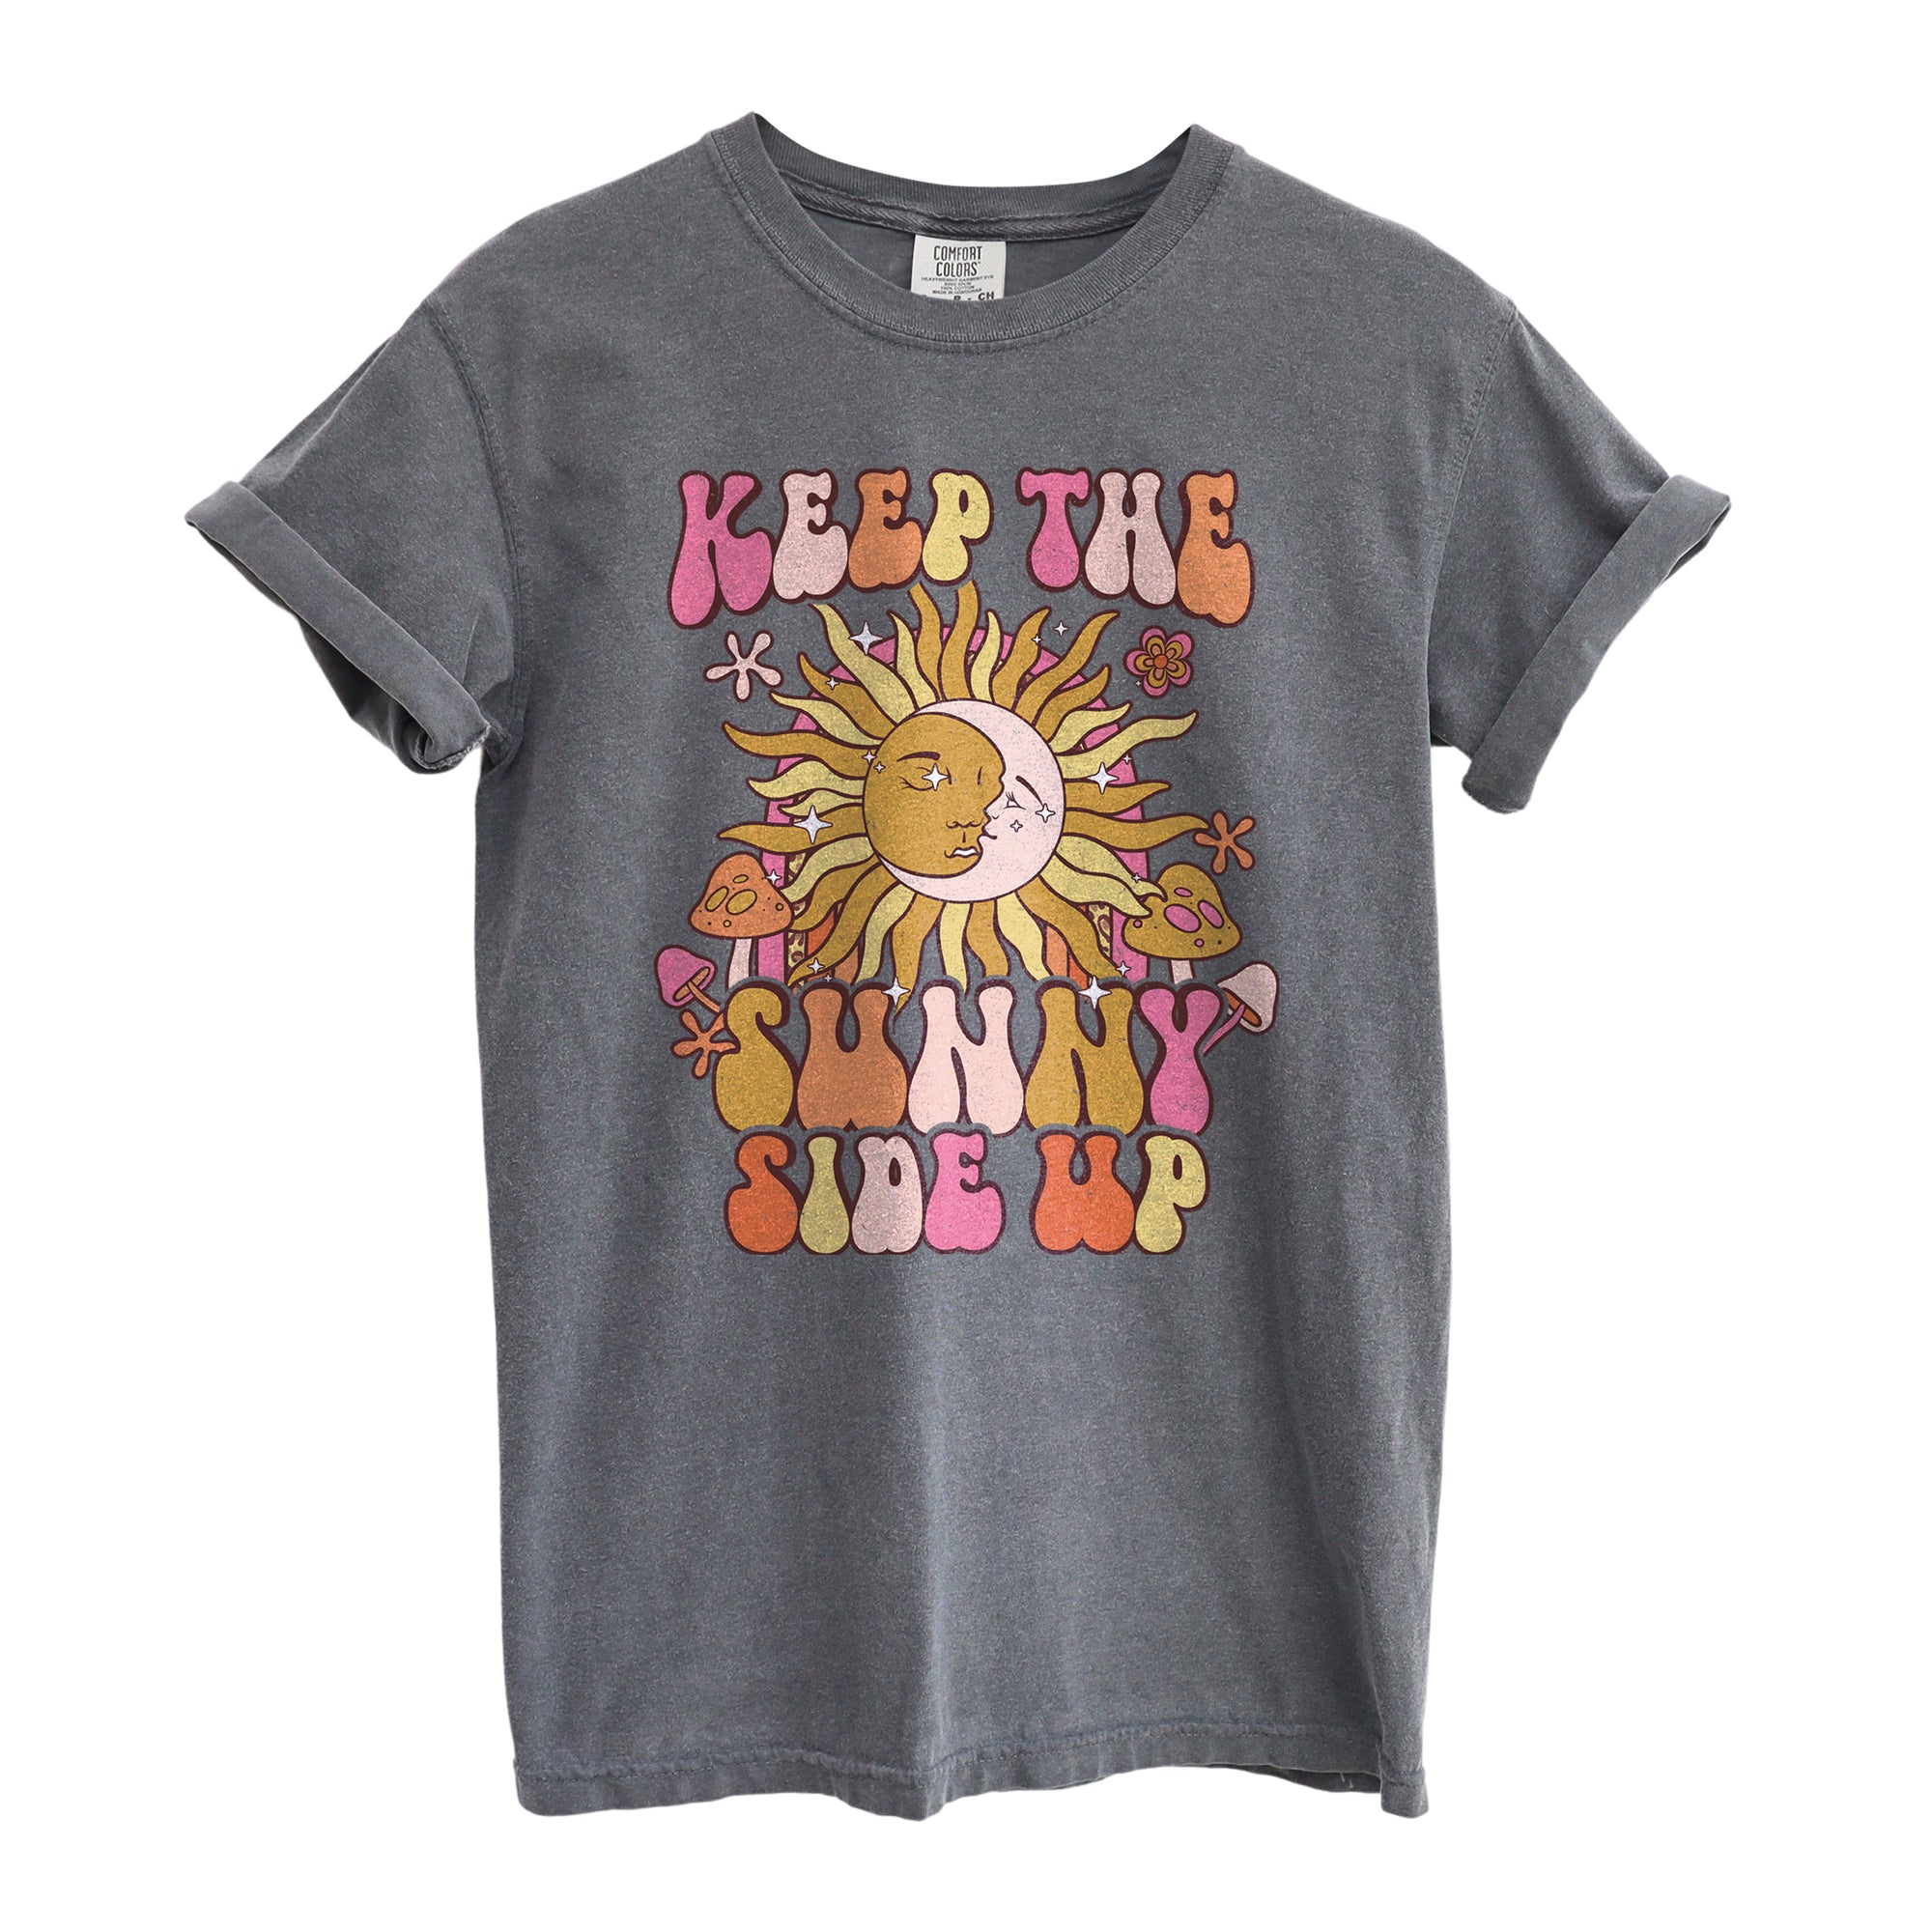 Keep the Sunny Side Up Oversized Shirt Garment-Dyed Graphic Tee